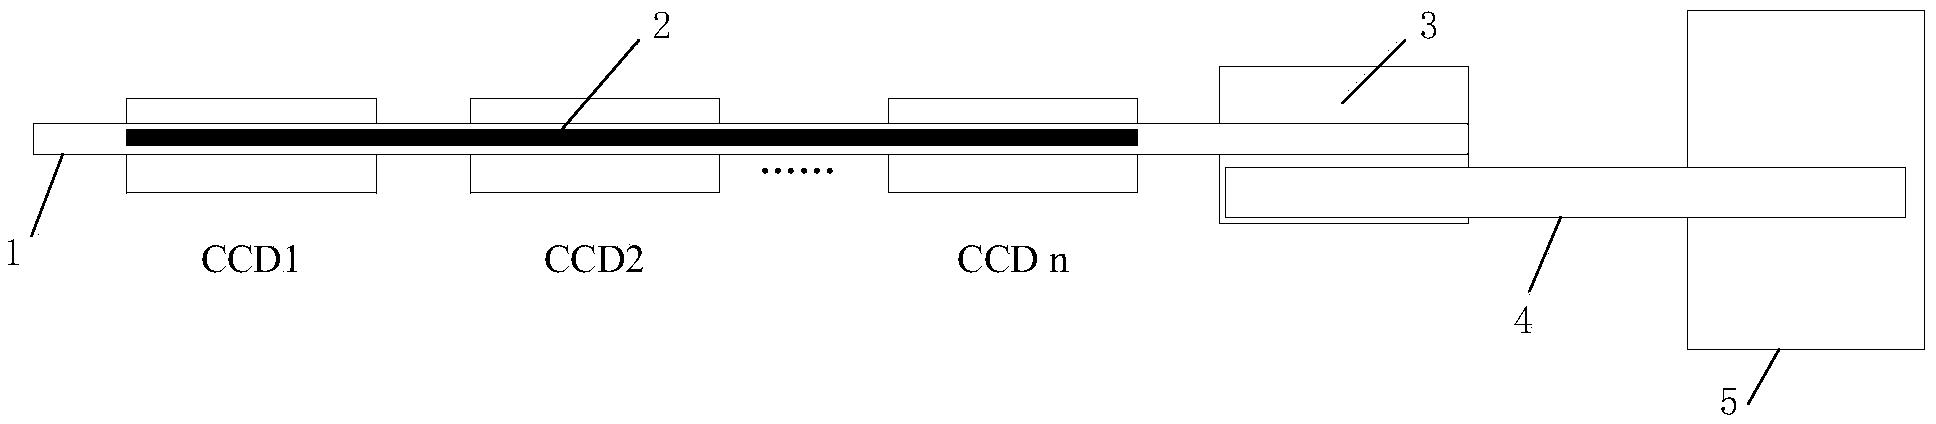 Constant-temperature control device for CCDs (charge coupled devices) of spaceflight optical remote sensor